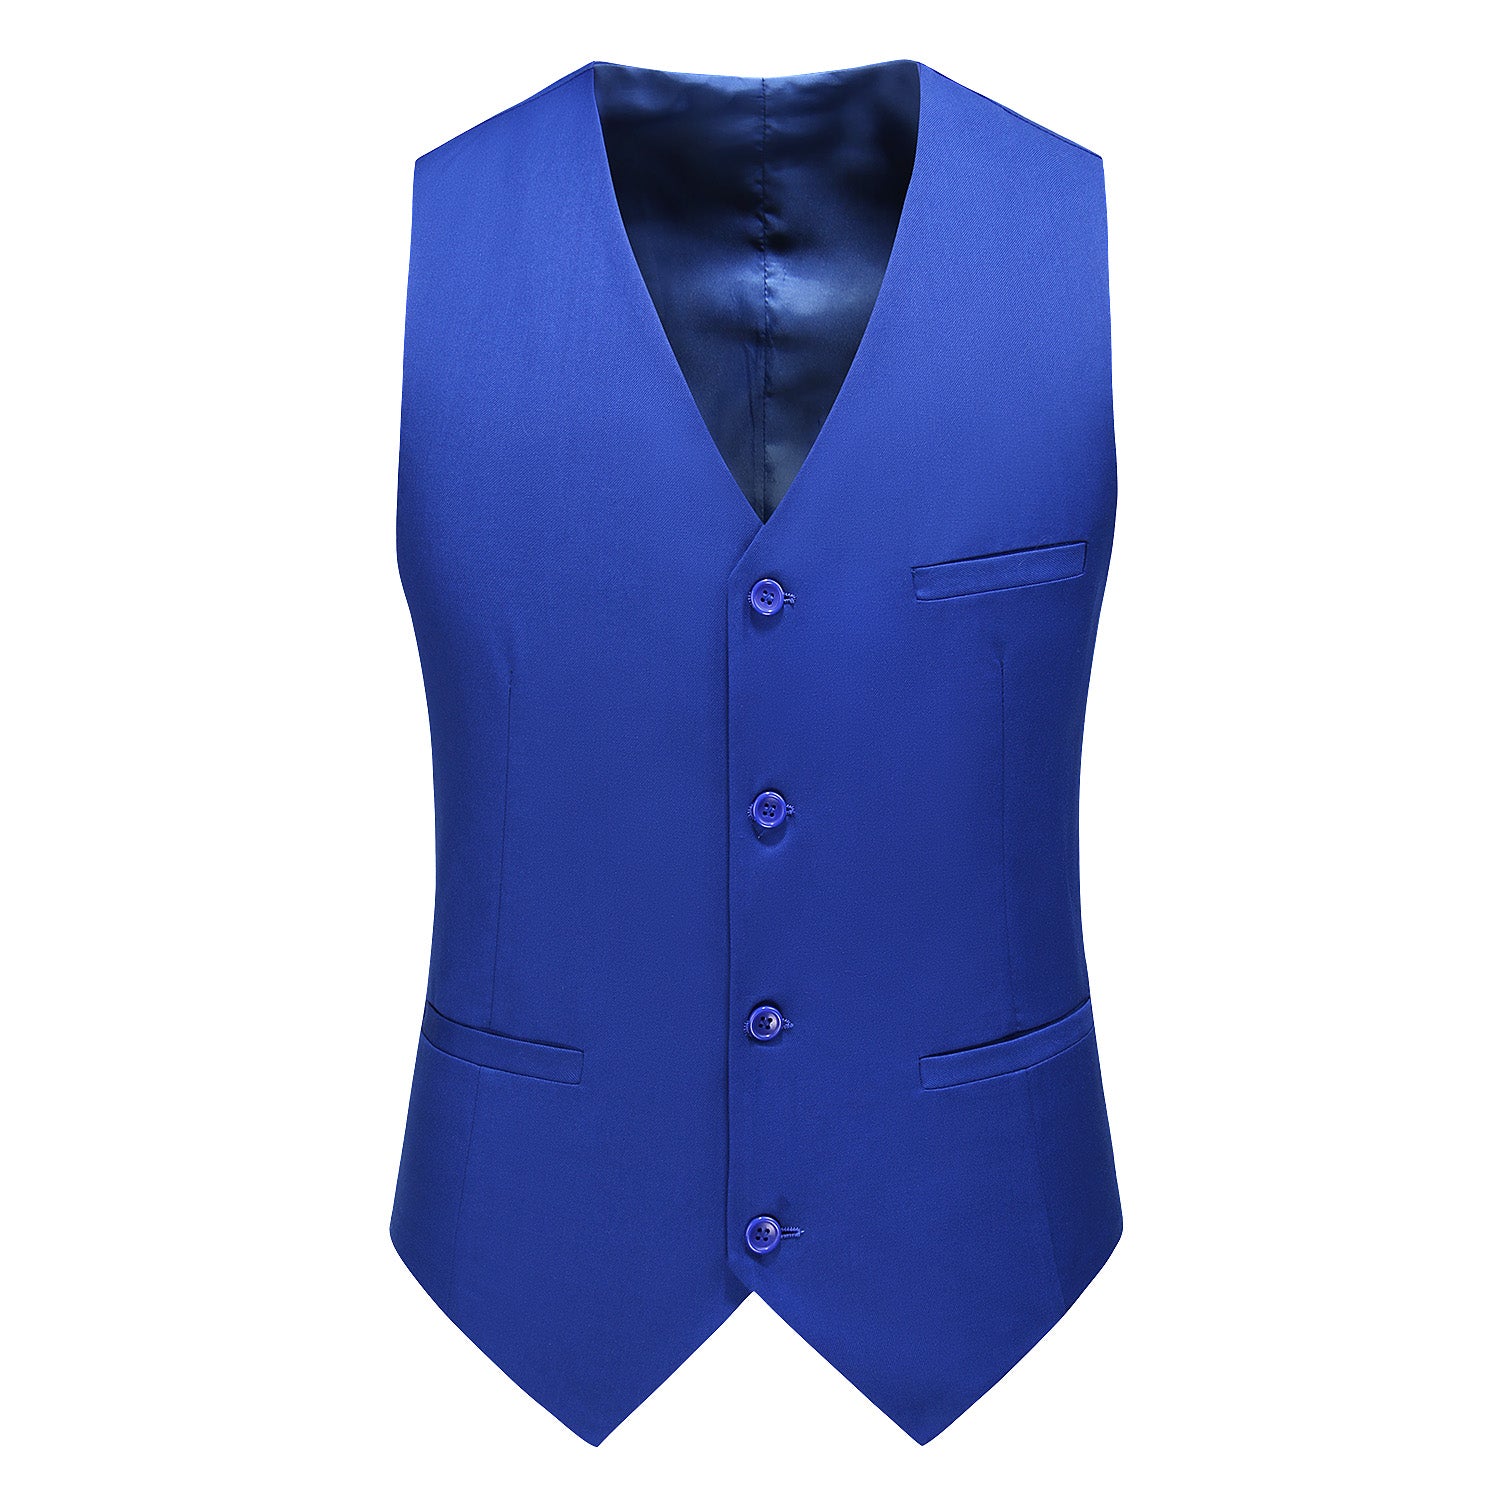 Men's Single Breasted Stylish Plain Vest Slim Fit Solid Waistcoat For Prom Groomsman Wedding Party